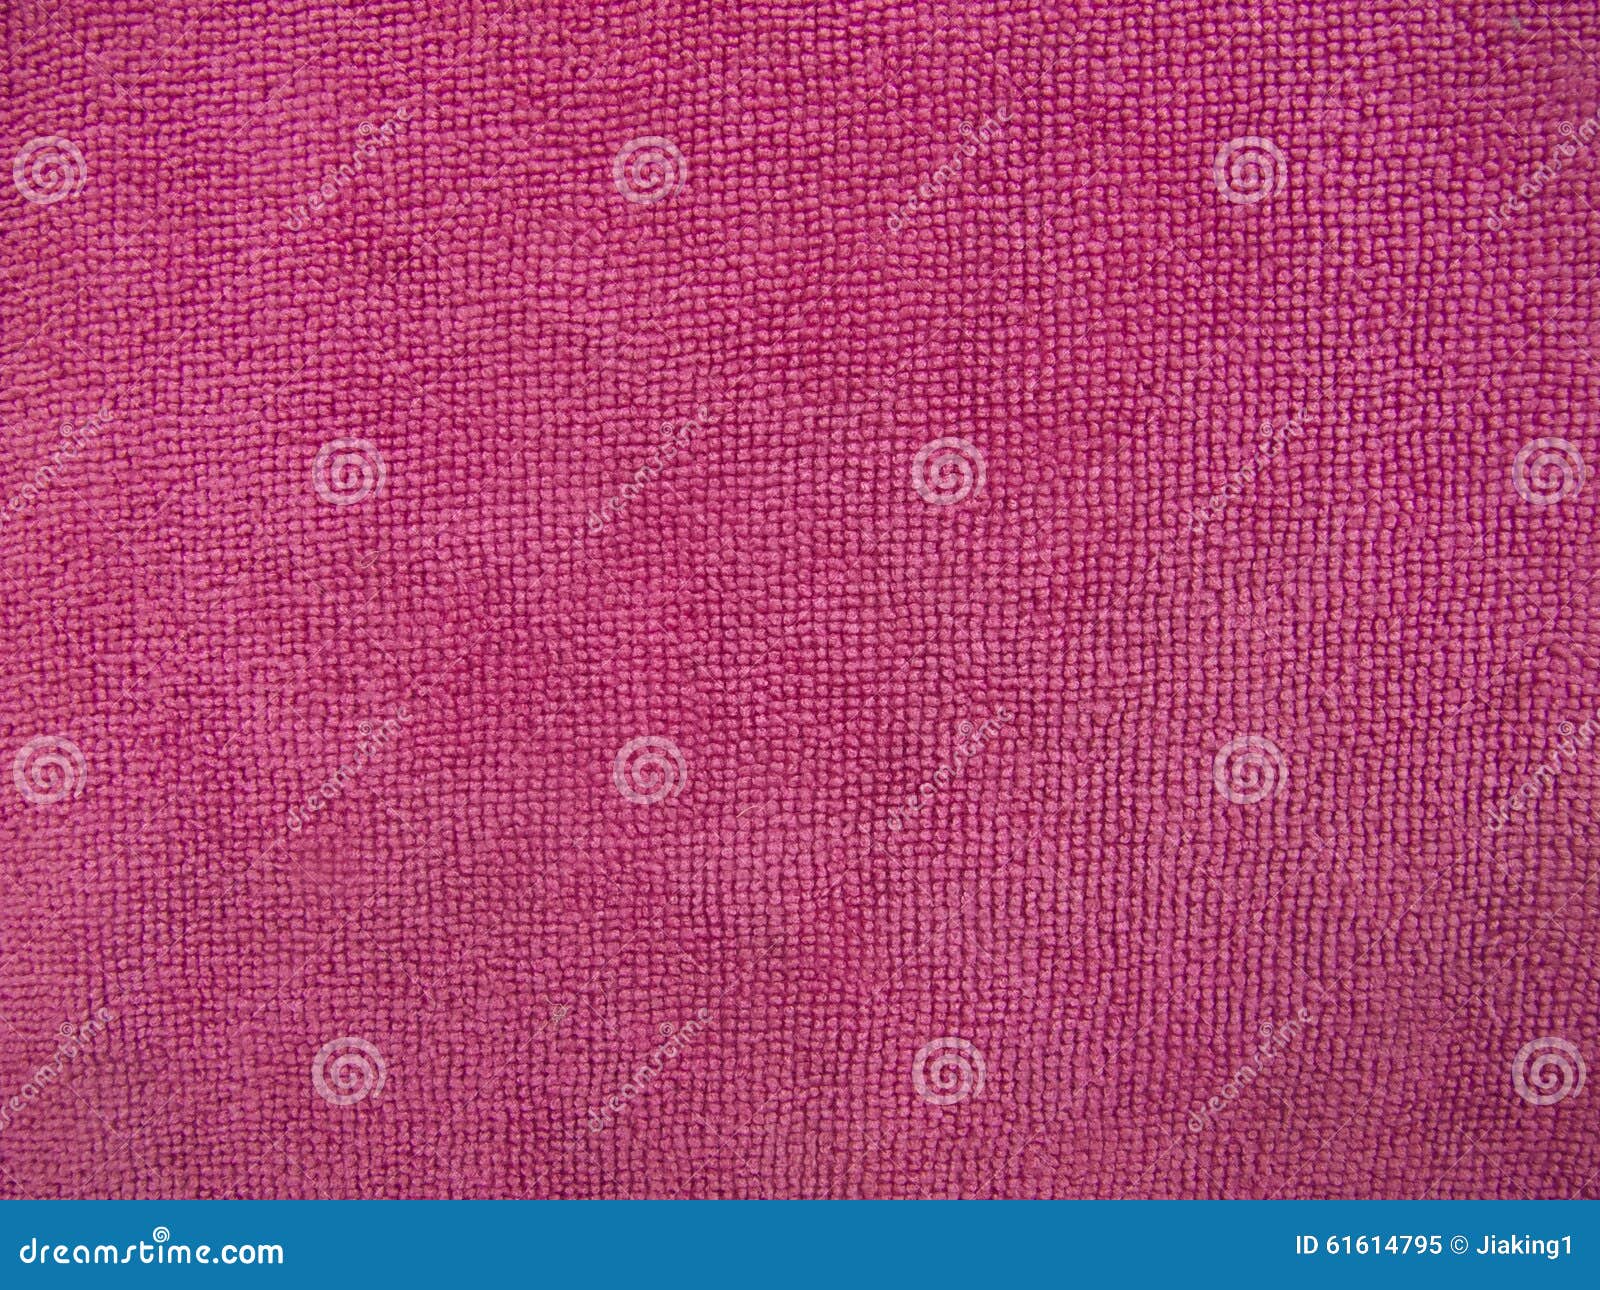 pink towel texture, cloth background